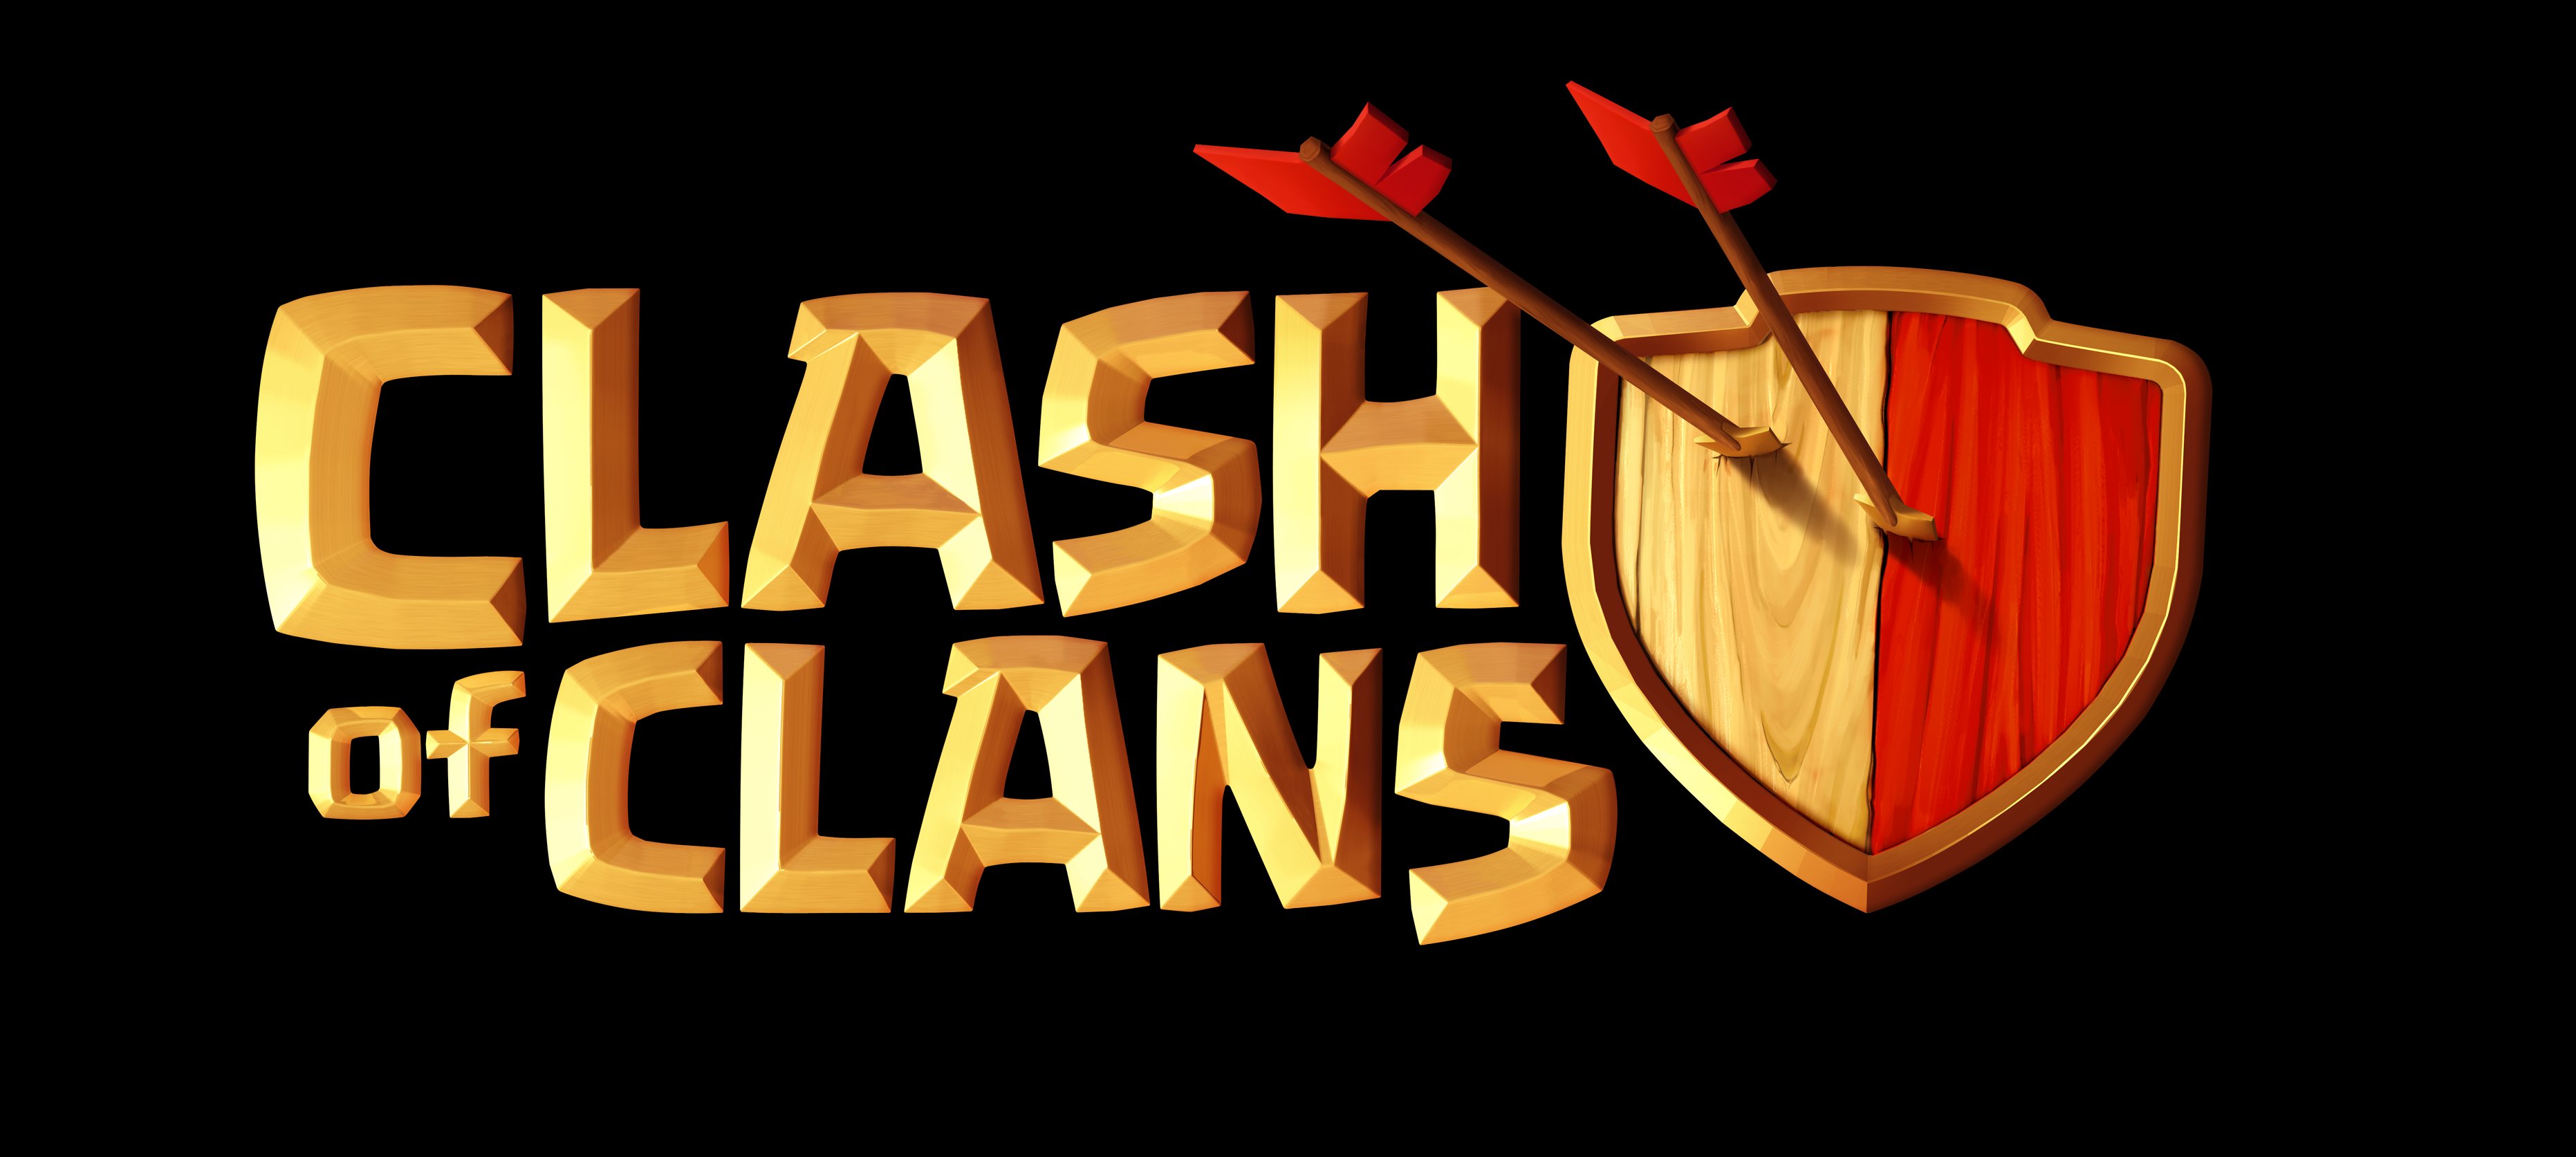 clash, Of, Clans, Fantasy, Fighting, Family, Action, Adventure, Strategy, 1clashclans, Warrior, Poster Wallpaper